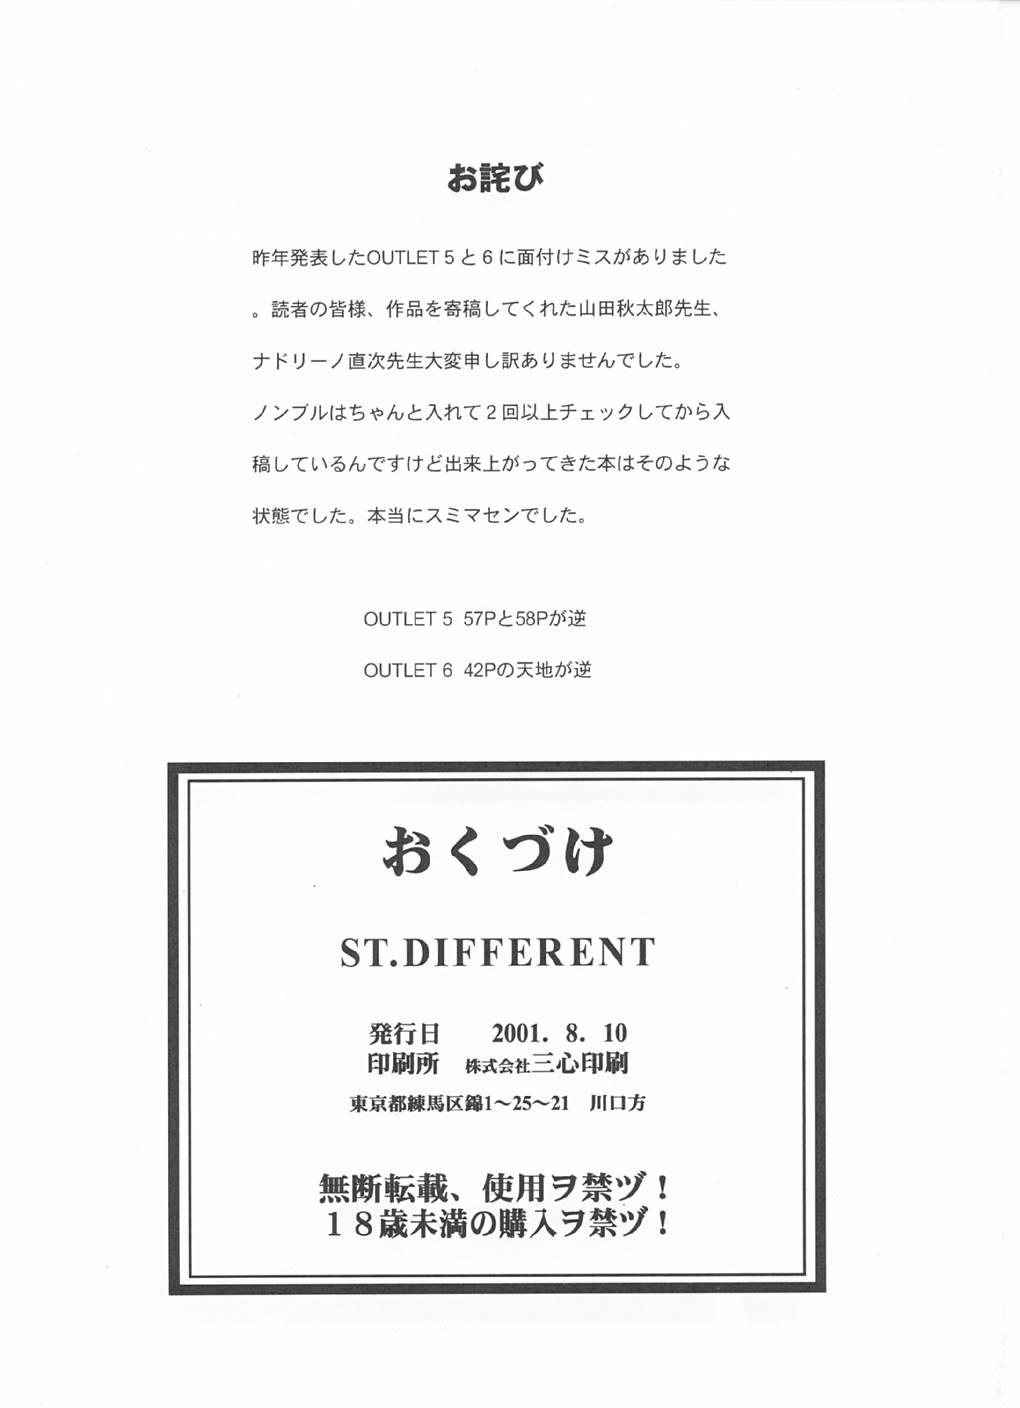 (C60) [ST.DIFFERENT (よろず)] OUTLET 8 (サクラ大戦3 ～巴里は燃えているか～)